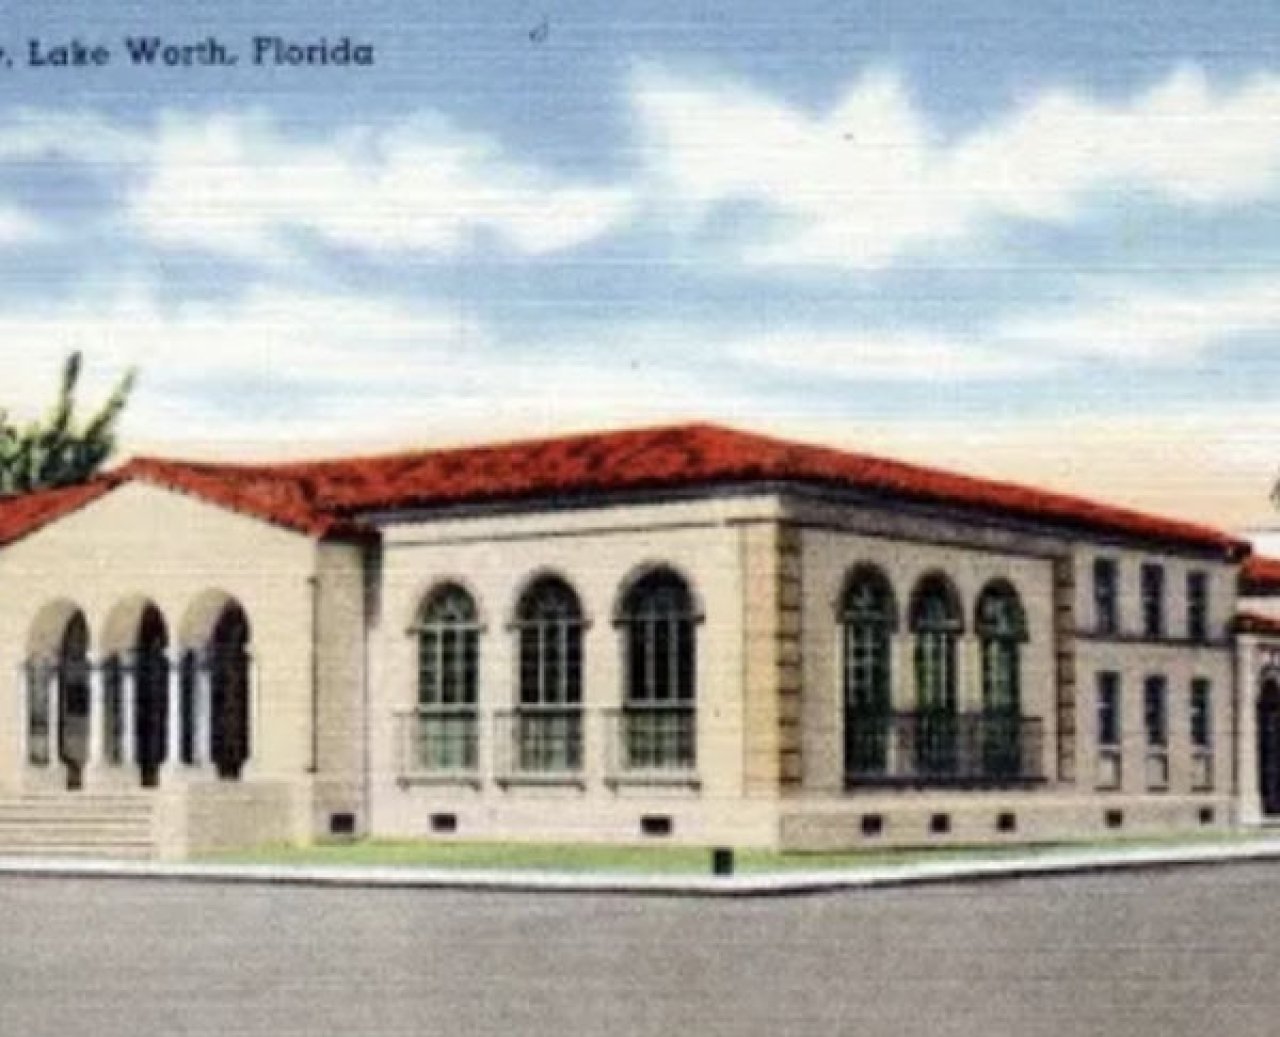 lake worth beach library rendering old.